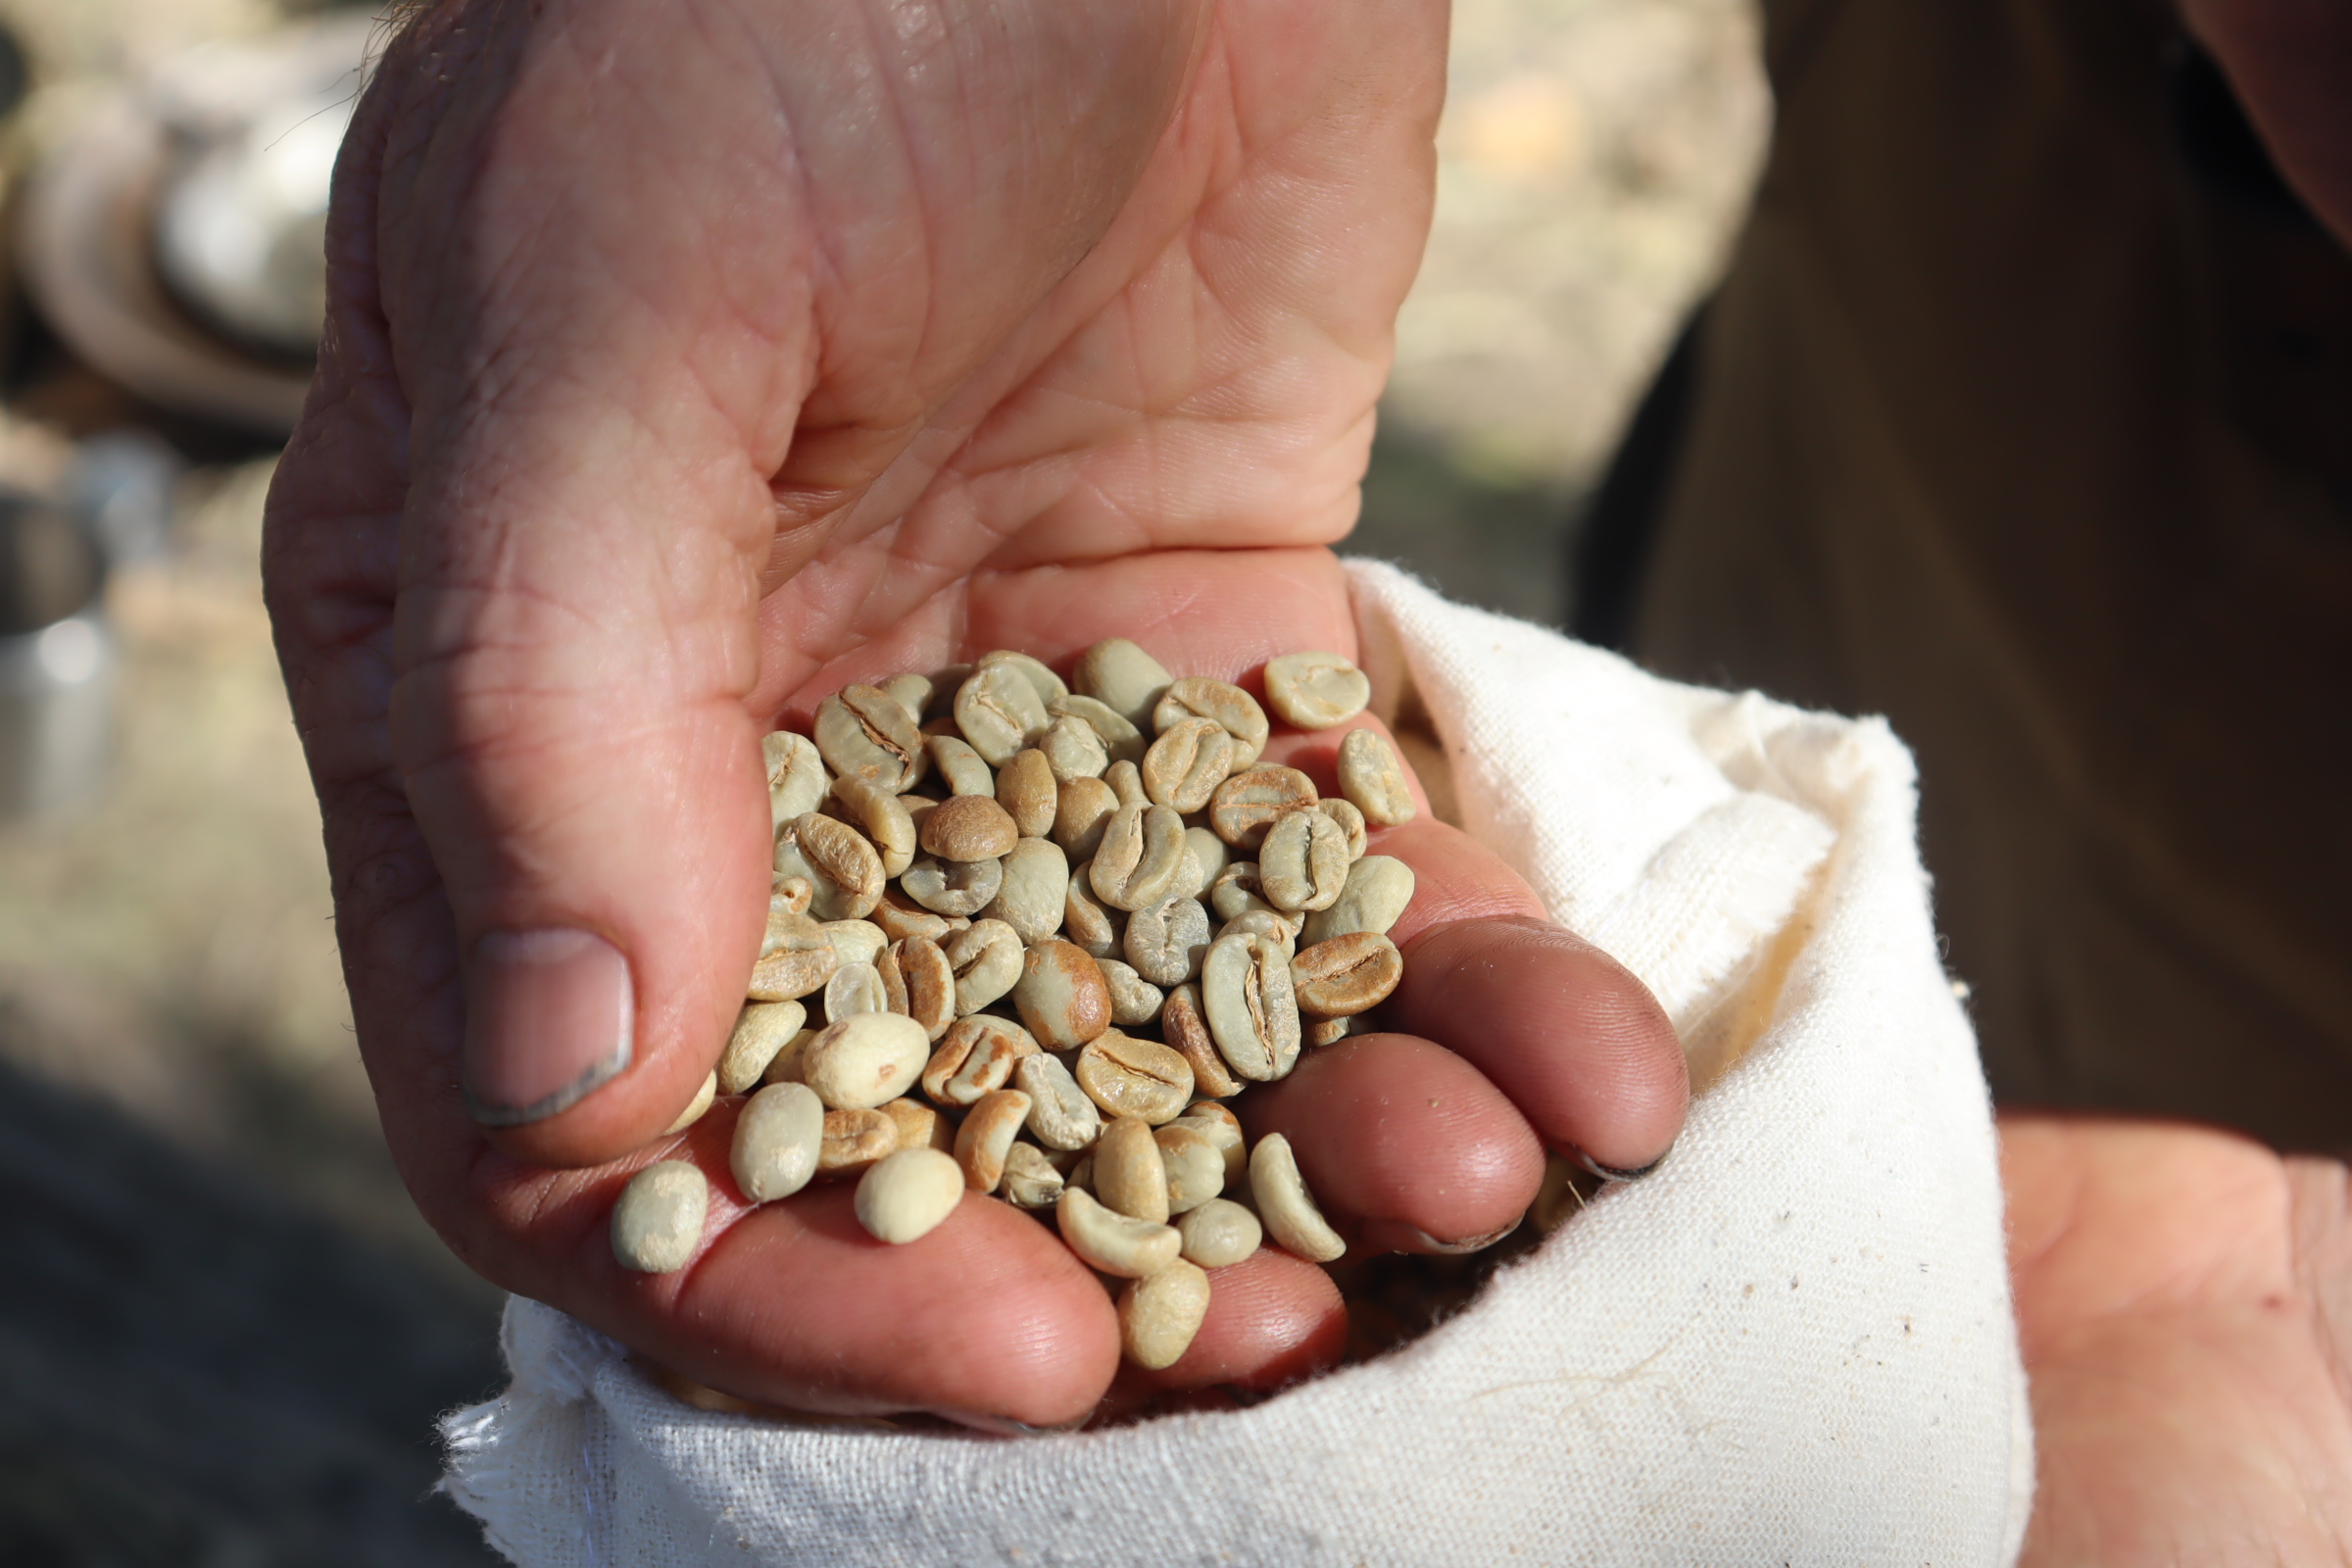 How To Make Coffee on The Santa Fe Trail